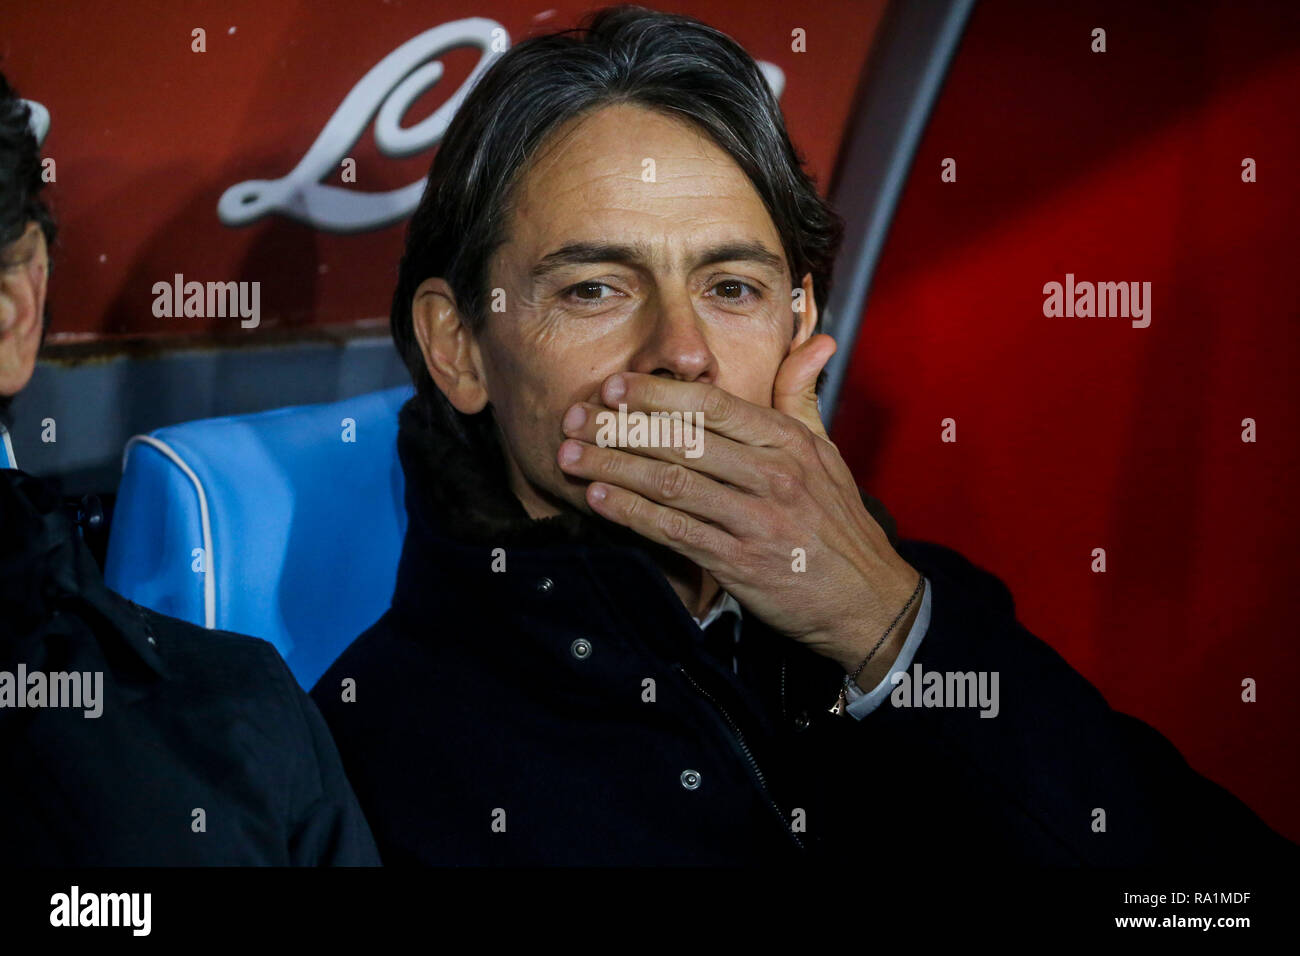 Napoli, Campania, Italy, 29-12-18, Serie A football match SSC Napoli - Bologna at the San Paolo Stadium in picture Filippo Inzaghi coach of the Bologn Stock Photo